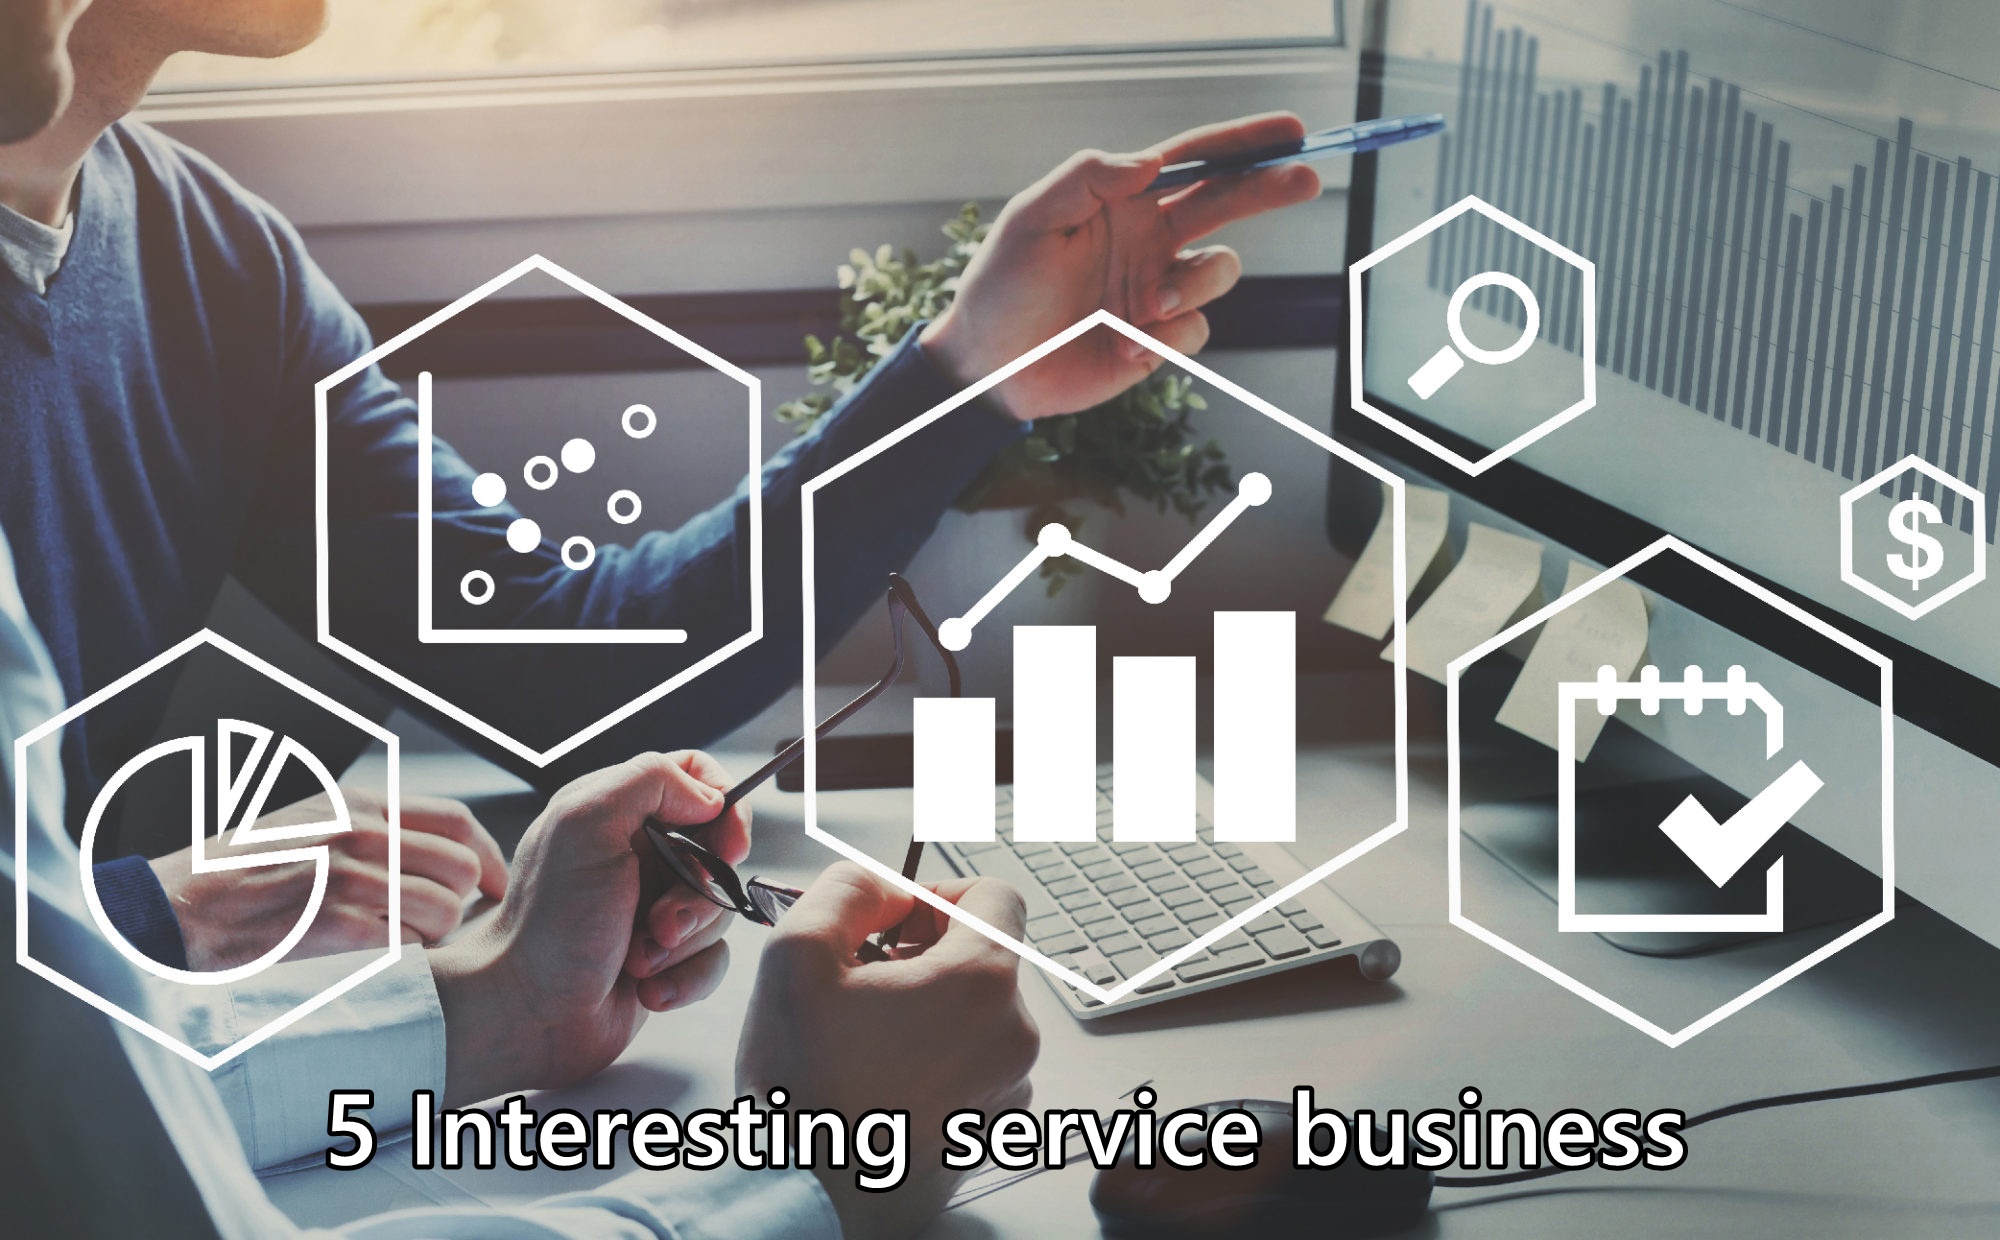 5 Interesting service business trends that ready to grow in the future.